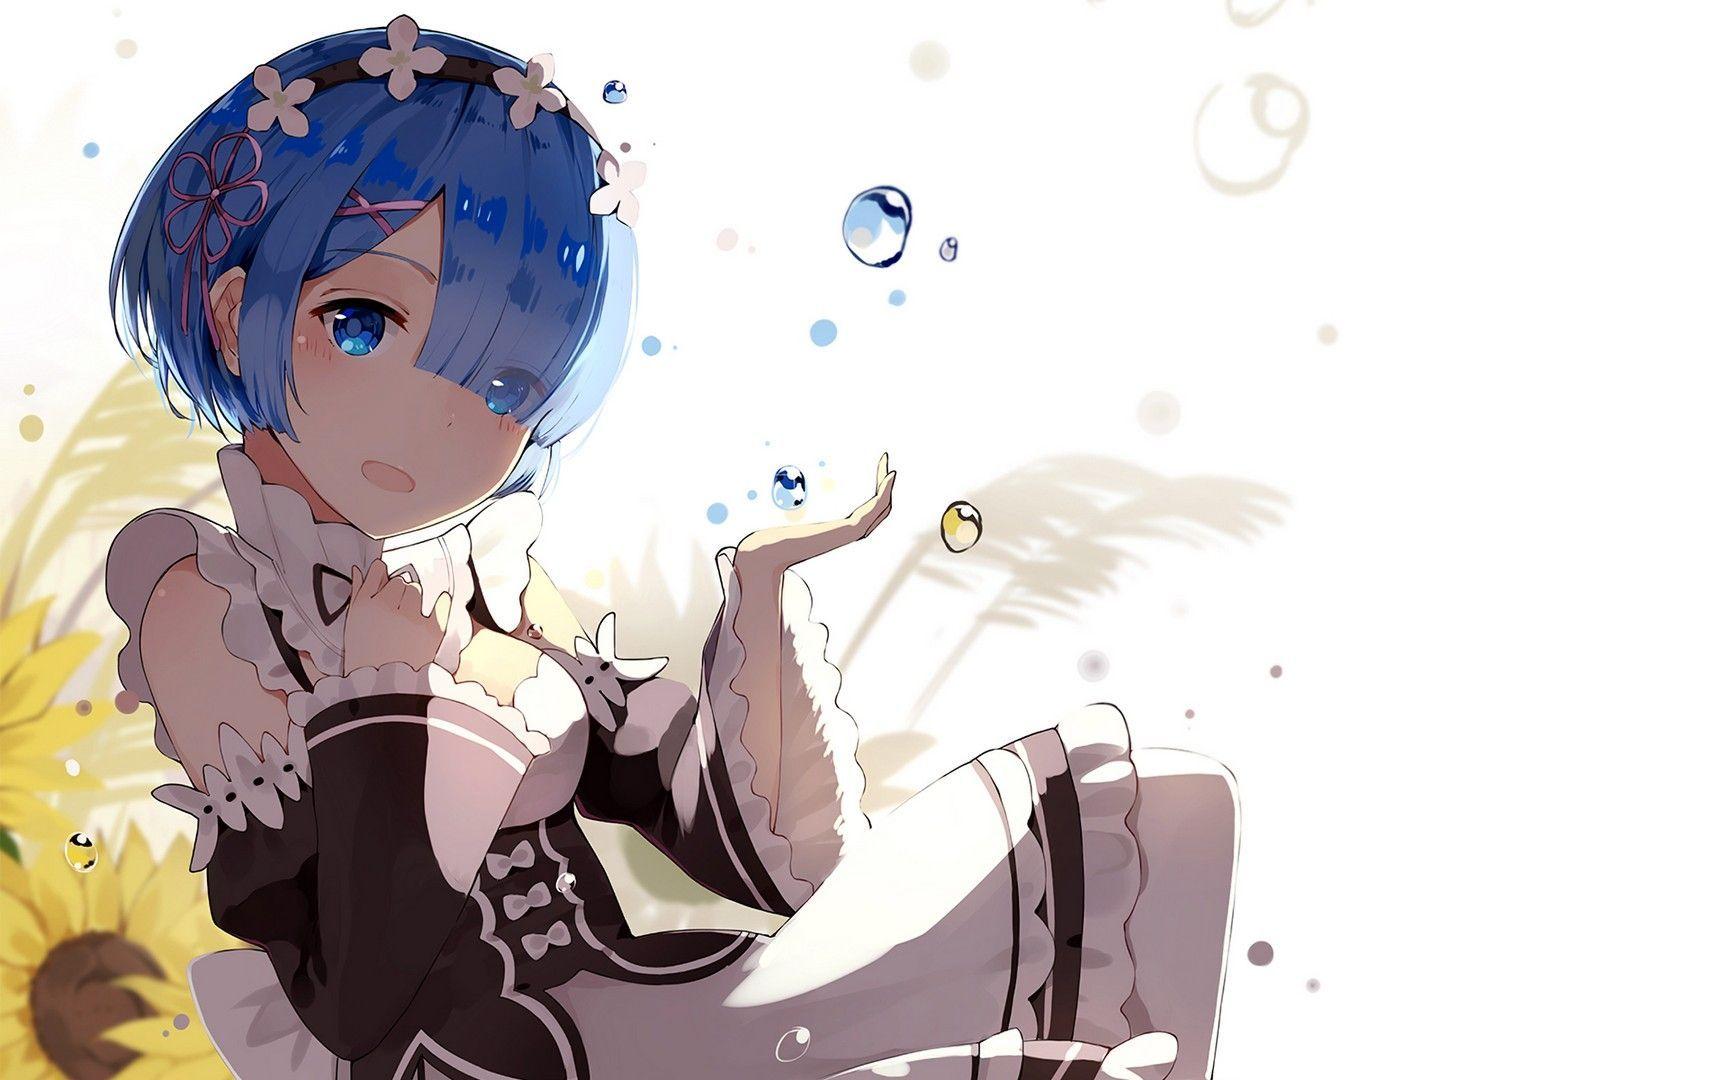 Wallpaper Anime, Anime, Anime girl, REM, Re:zero kara hajime chip isek or  seikatsu, Life in a different world from zero, Re:Zero - Starting Life in  Another World, Re:zero for mobile and desktop